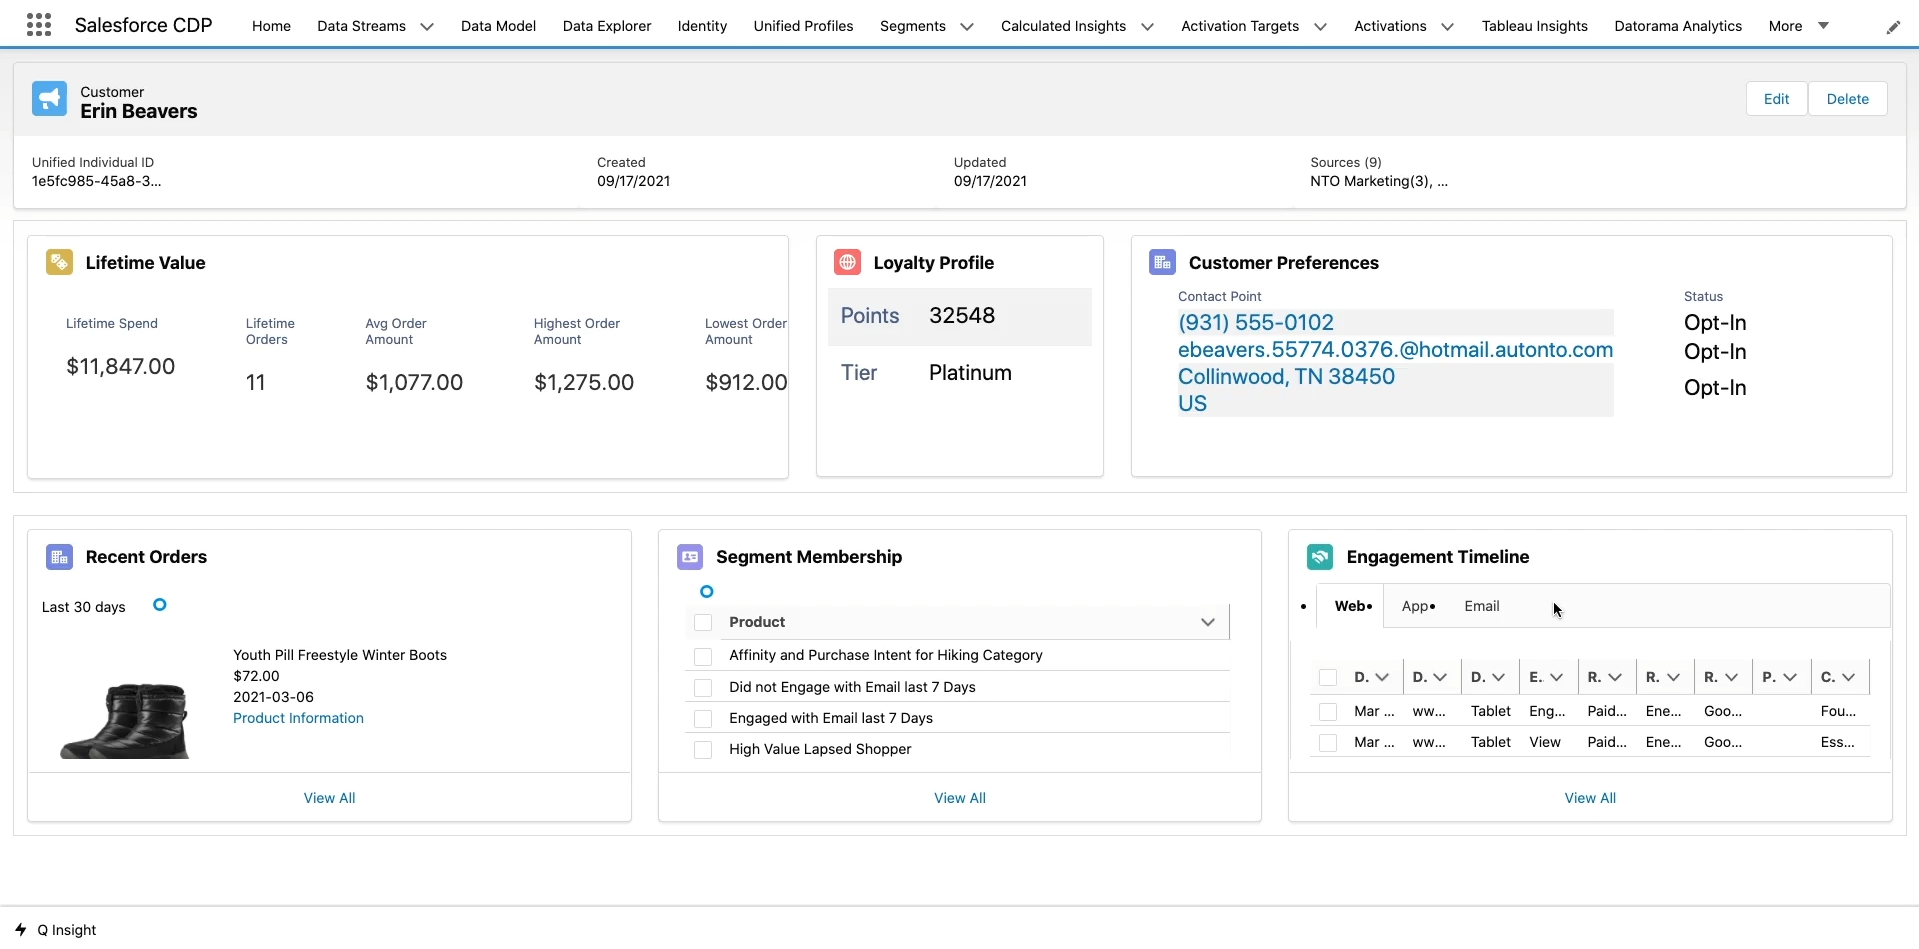 Overview of Salesforce CDP UI